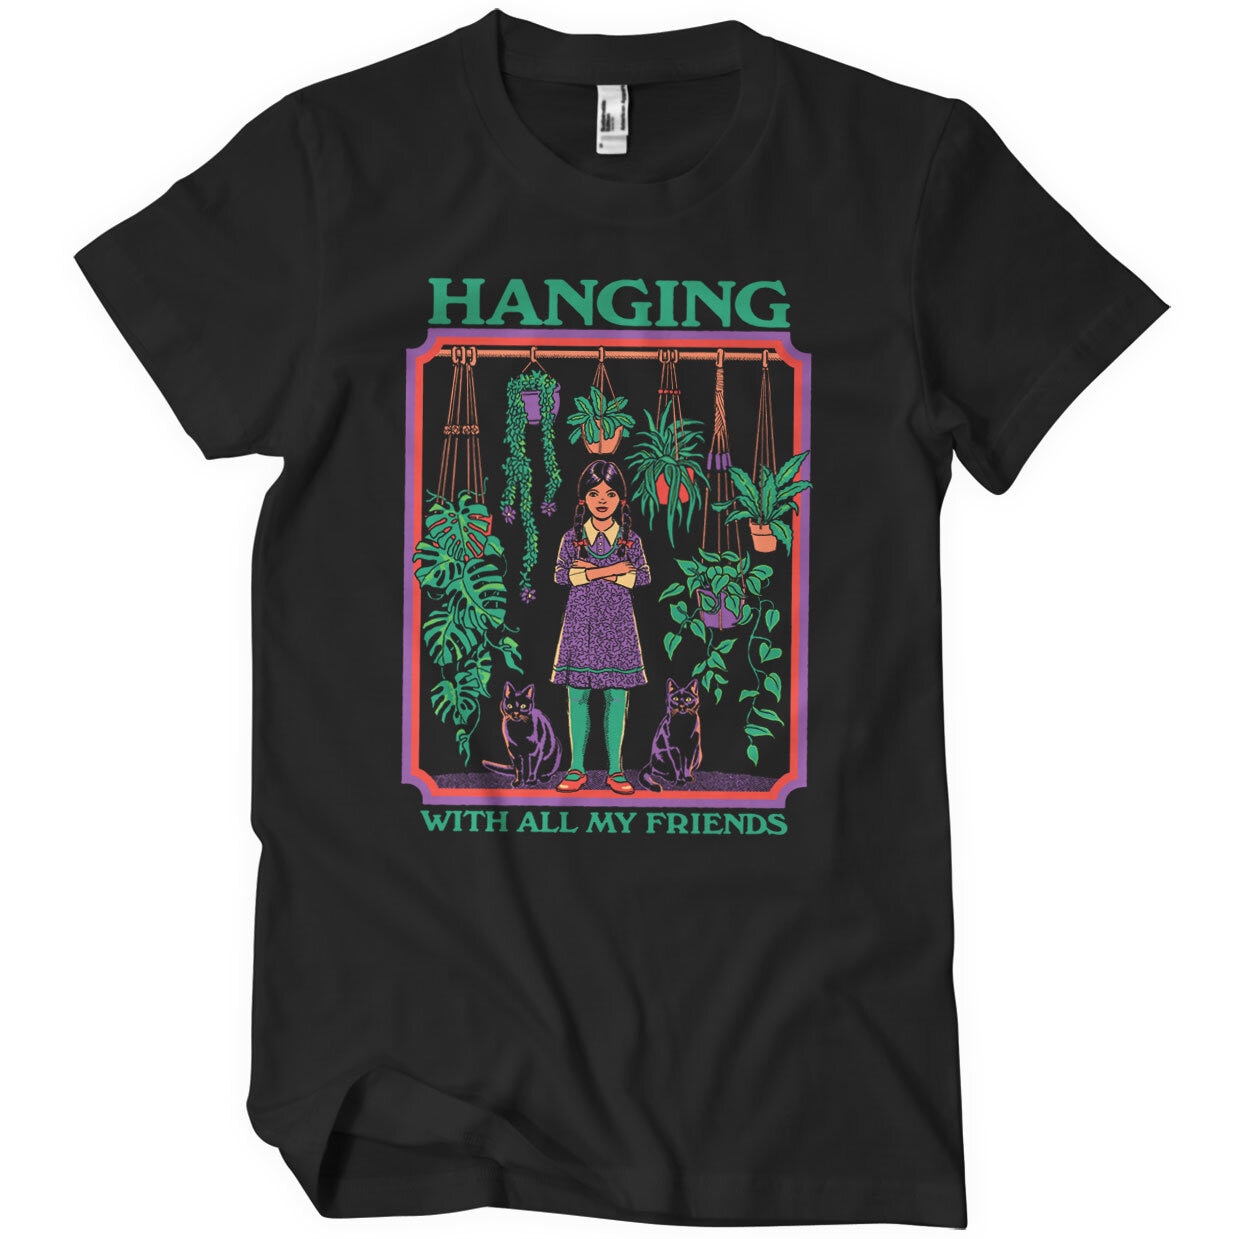 Hangning With All My Friends T-Shirt